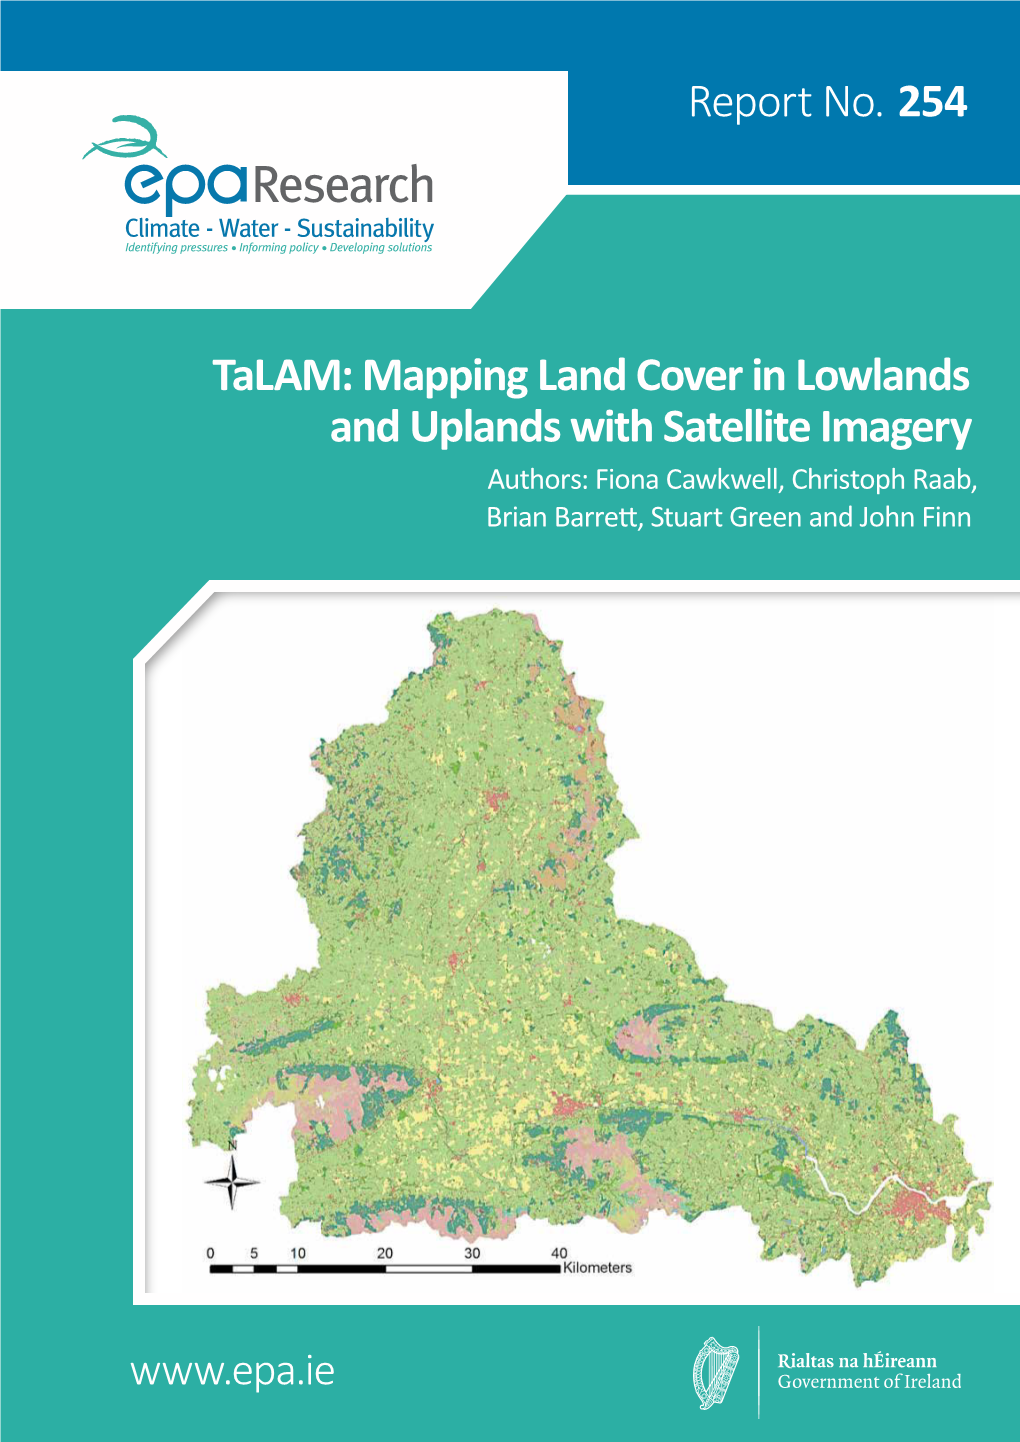 Mapping Land Cover in Lowlands and Uplands with Satellite Imagery